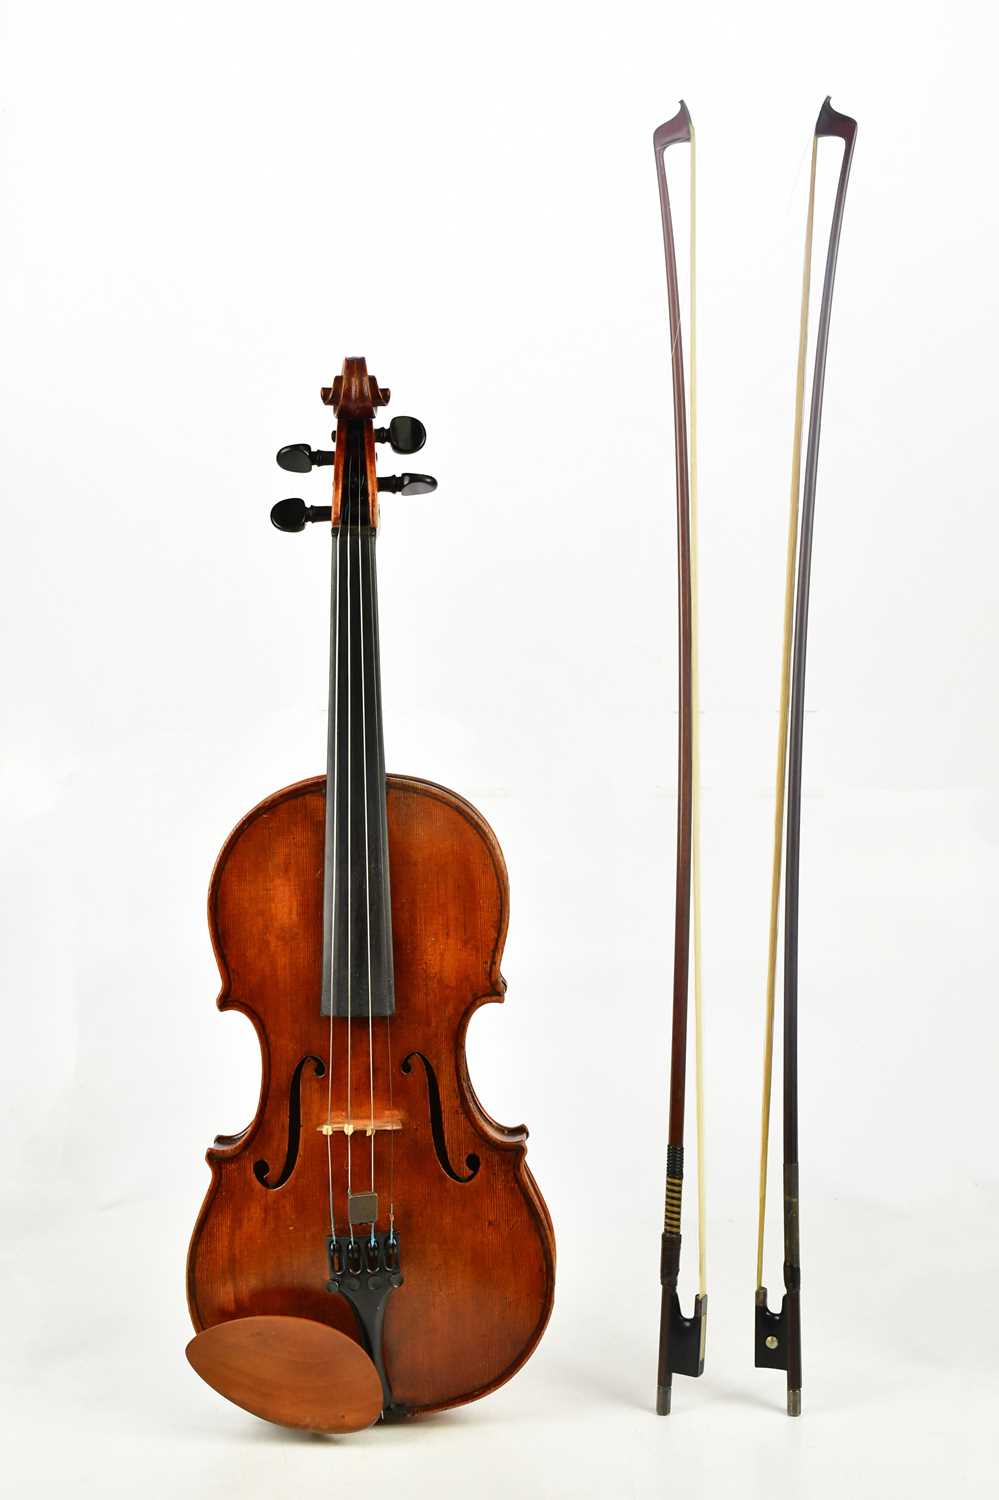 JAMES HARDIE & SONS; a full size Scottish violin with two-piece back and interior label 'Made by